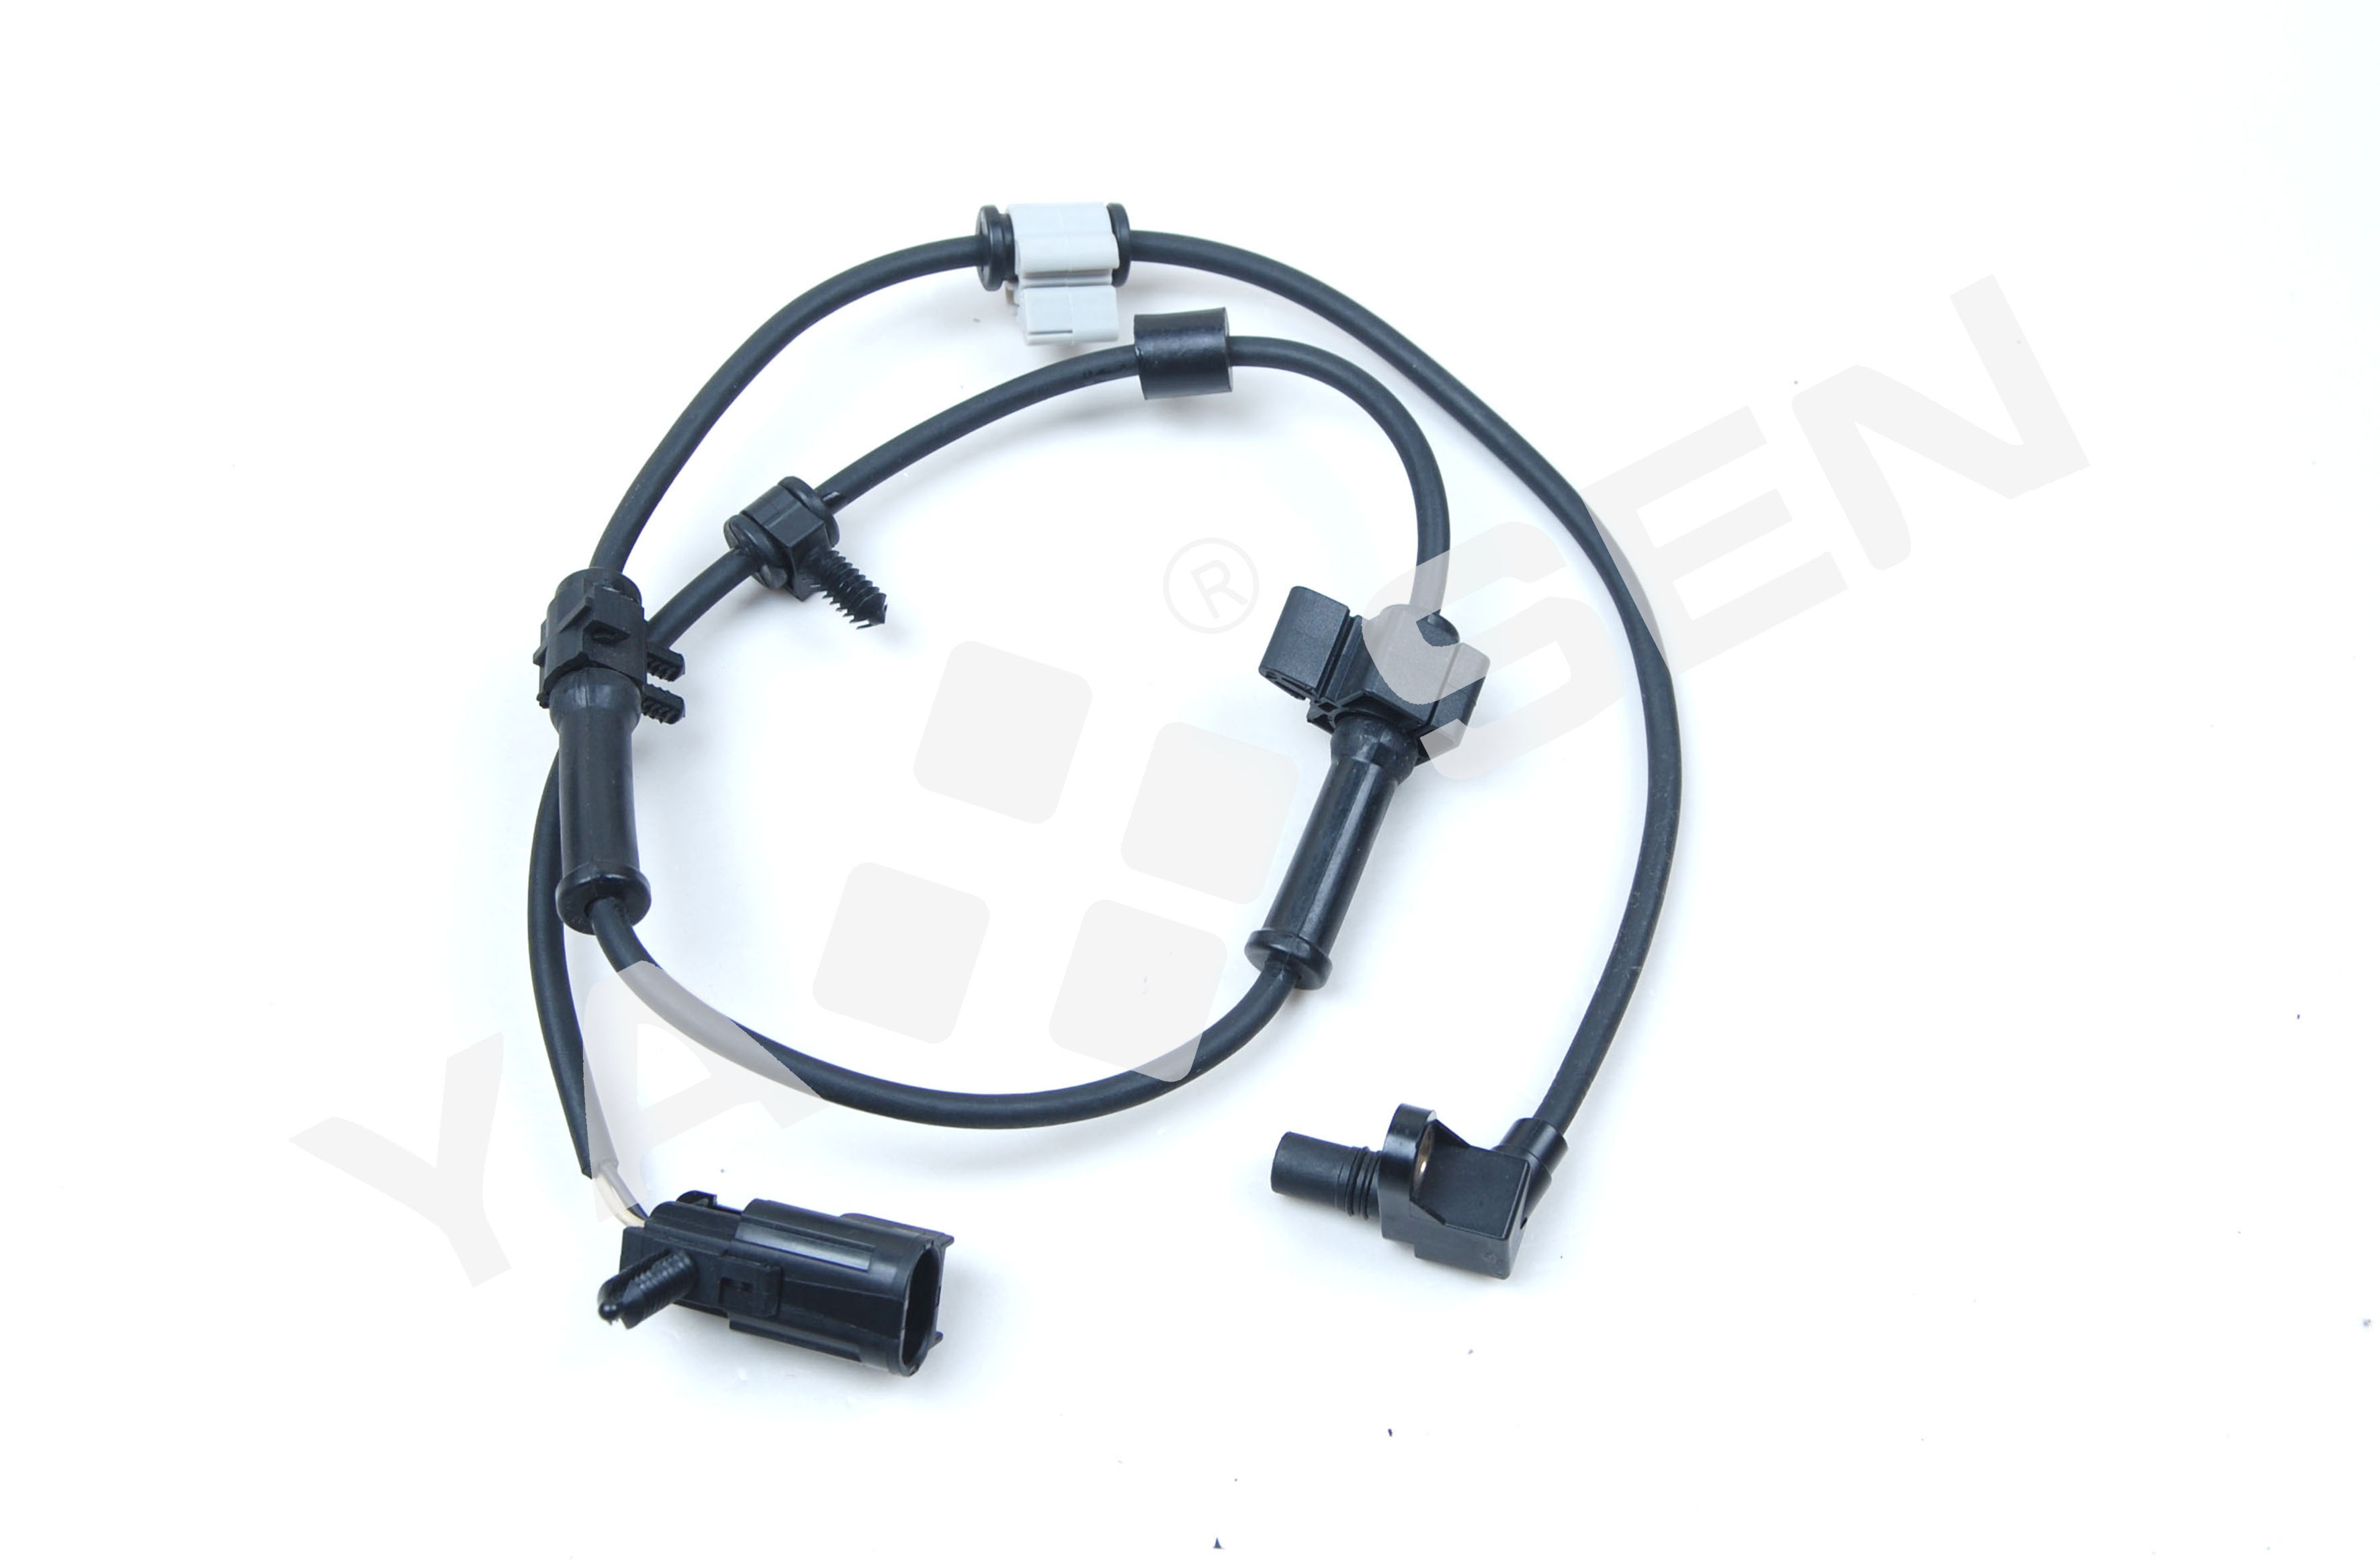 ABS Wheel Speed Sensor for CHEVROLET/FORD, SU9444 5S7978 72-6550 ALS1337 15158254 970282